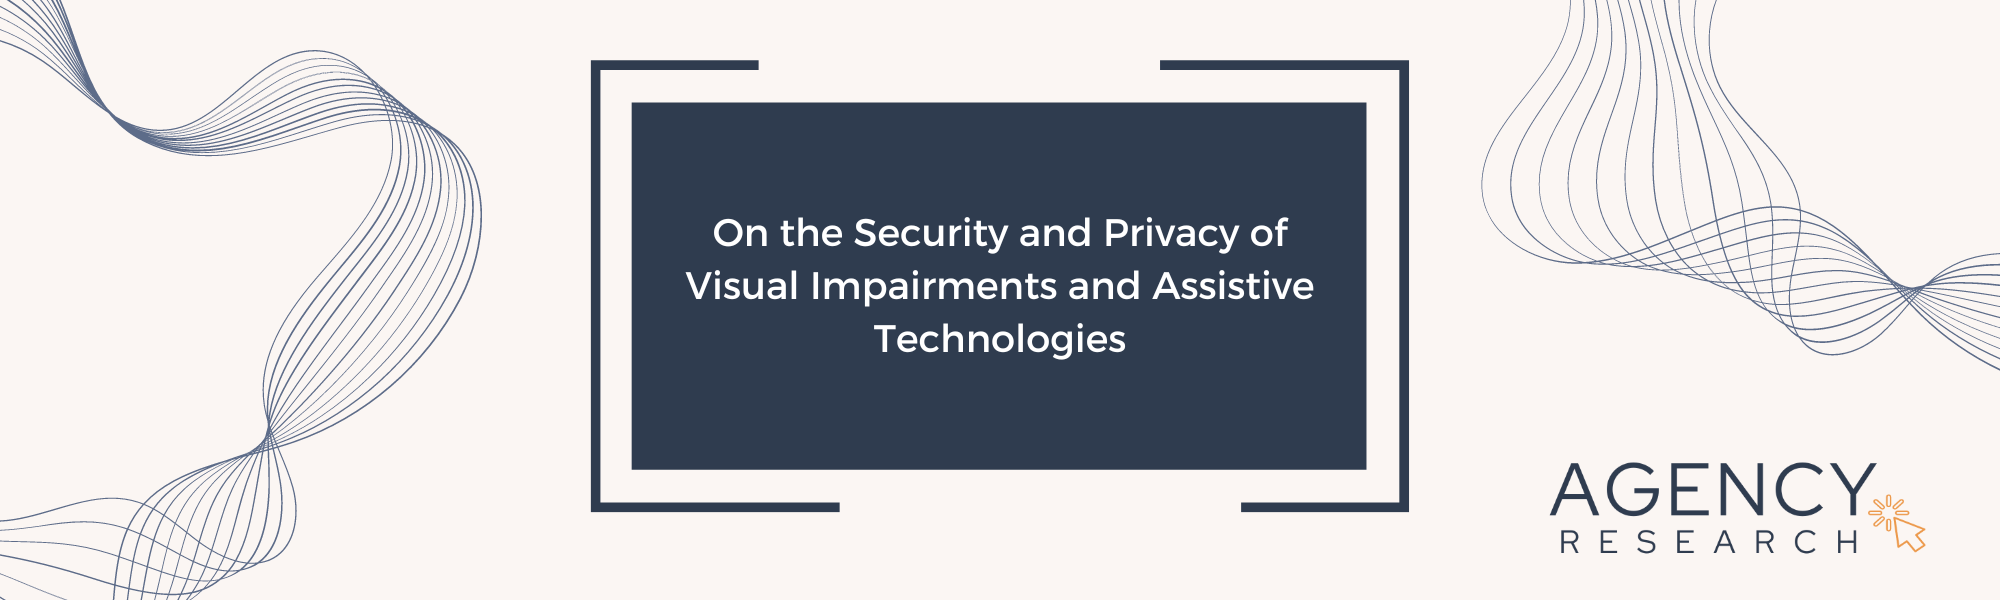 On the Security and Privacy of Visual Impairments and Assistive Technologies